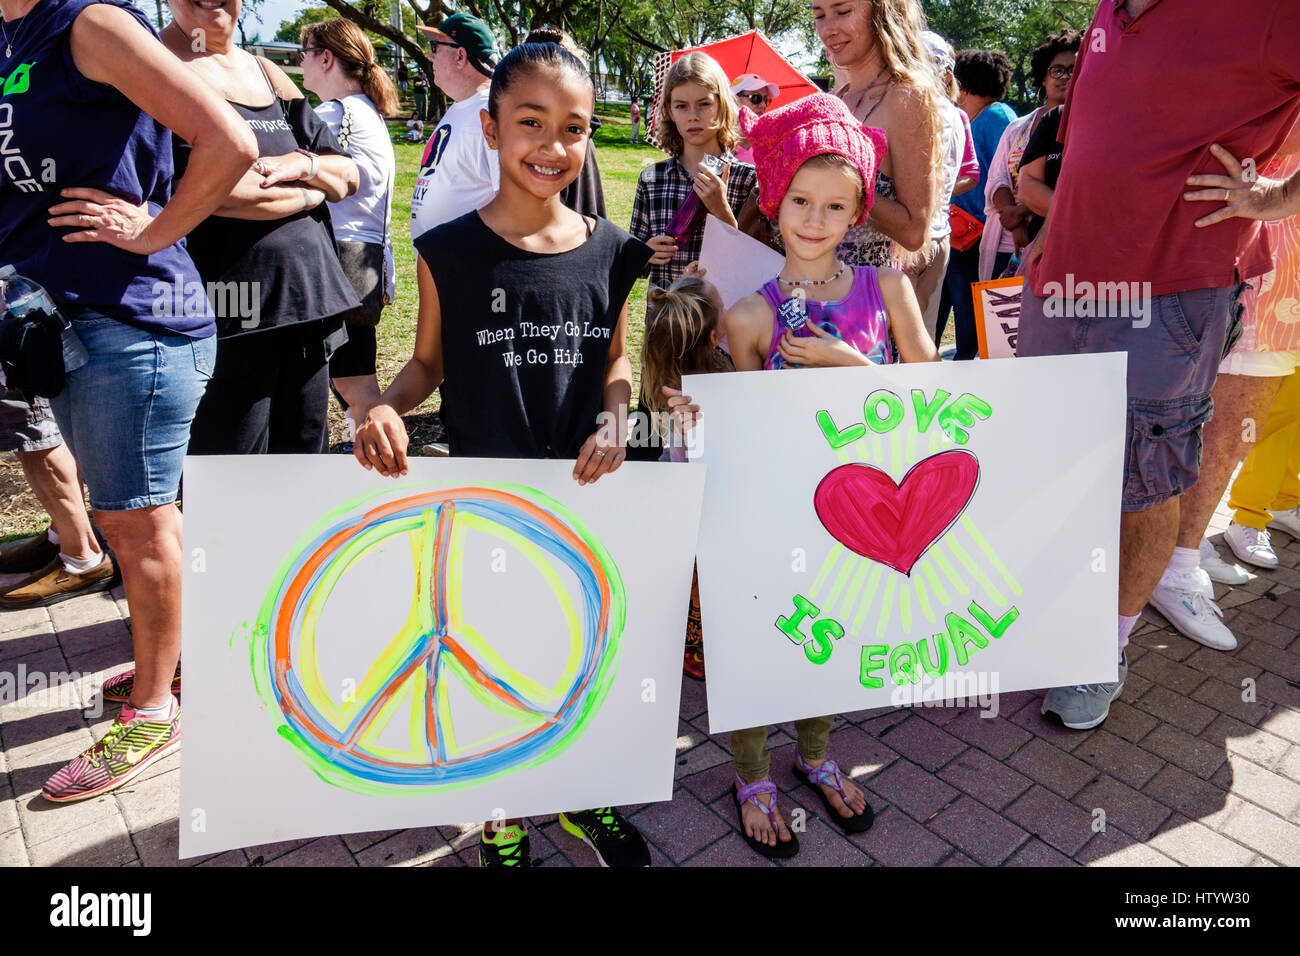 Miami Florida,Downtown,Bayfront Park,Women's March,political protest,march,human rights,advocacy,sign,Black. girl,holding sign,protesters,peace symbol Stock Photo